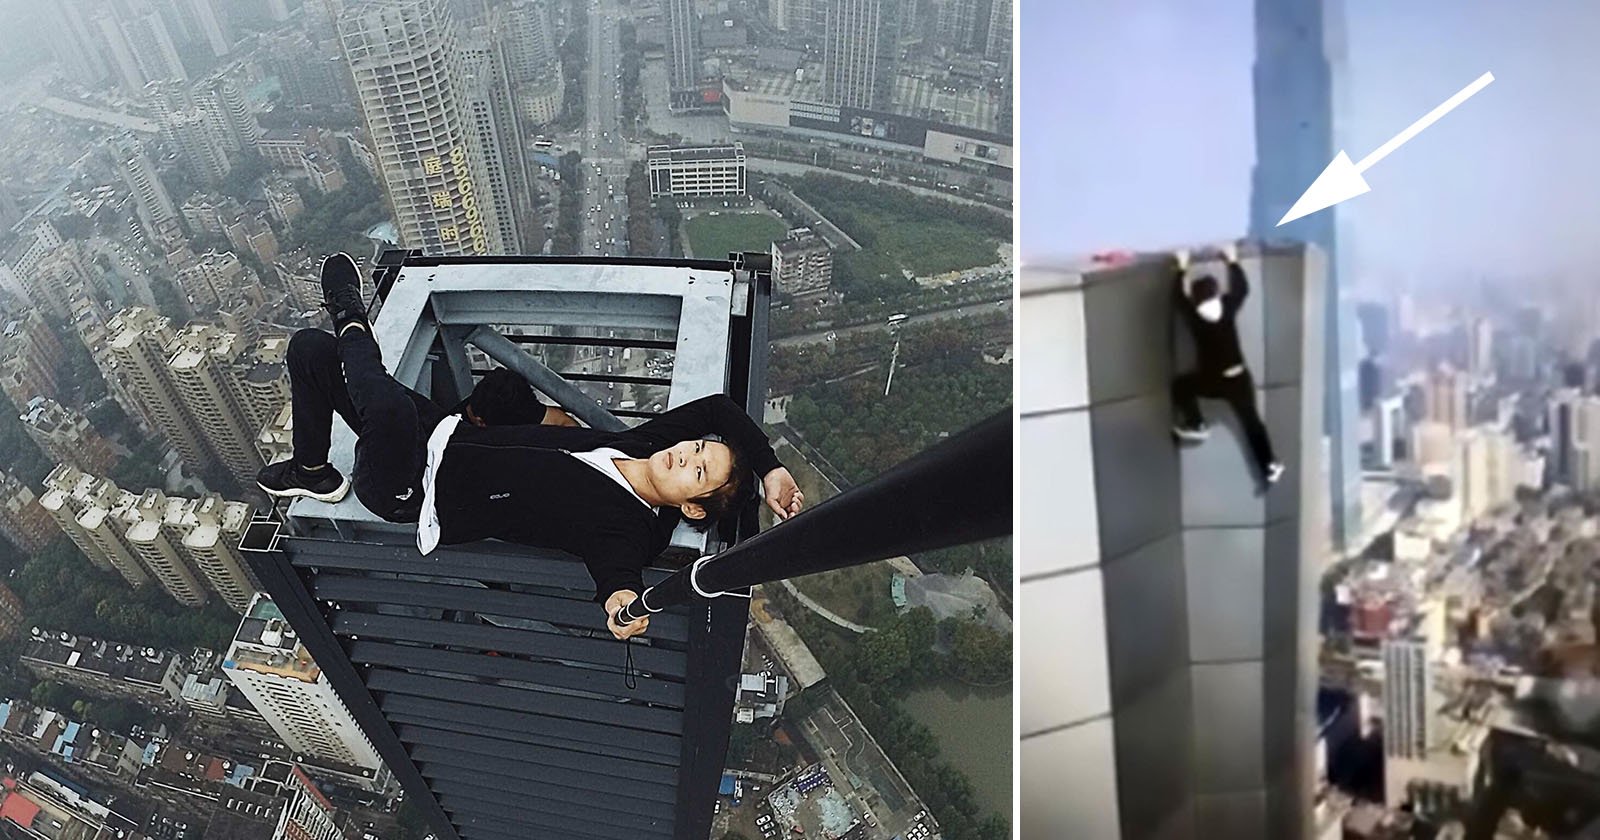 Famous Chinese 'Rooftopper' Falls to Death from 62-Story Building